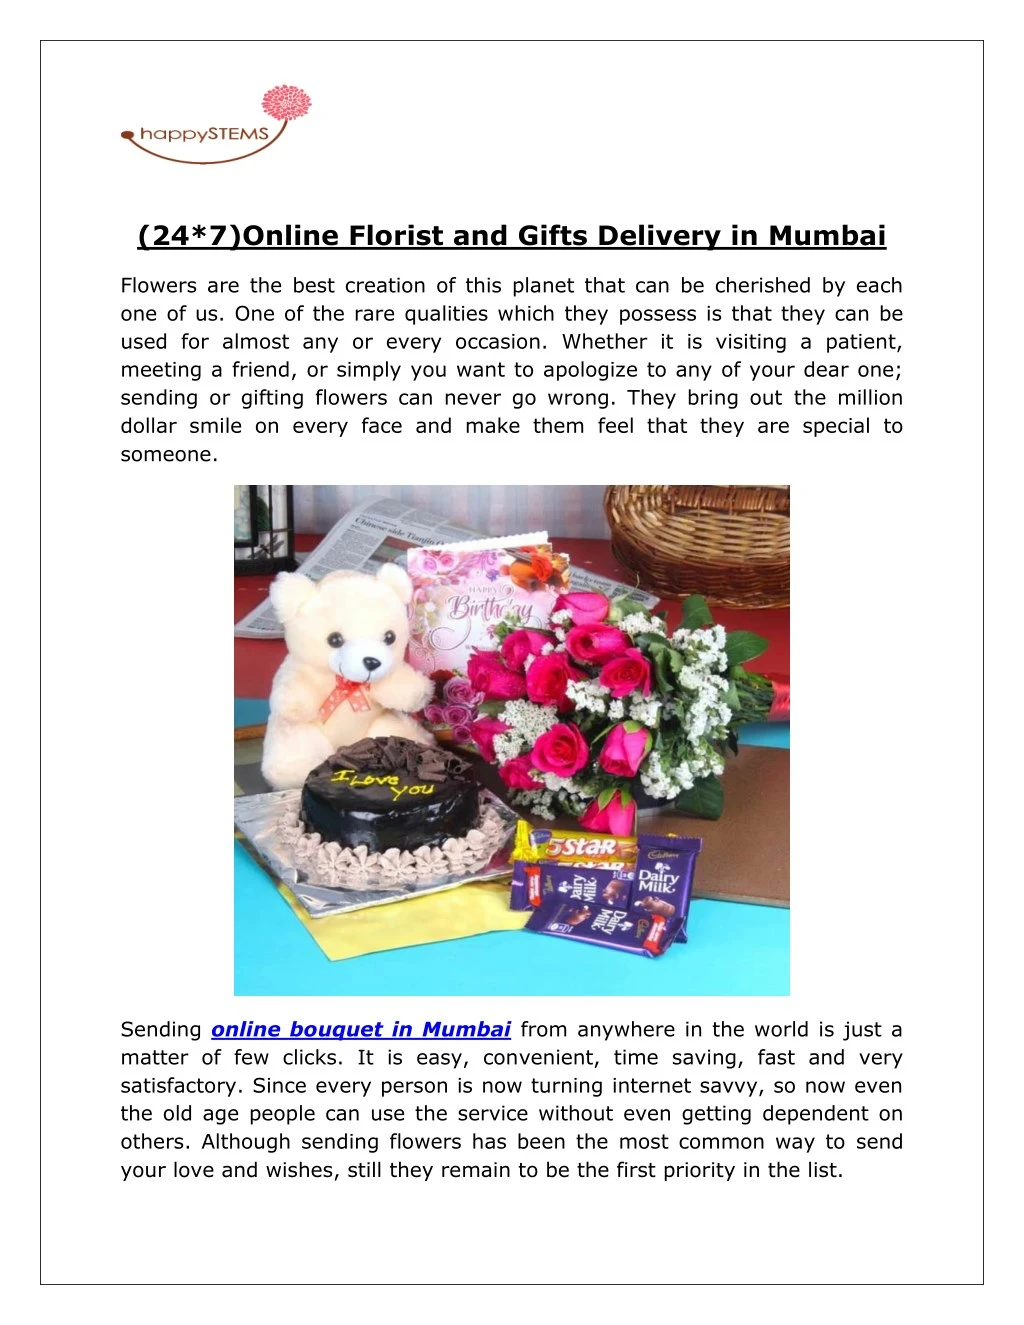 24 7 online florist and gifts delivery in mumbai